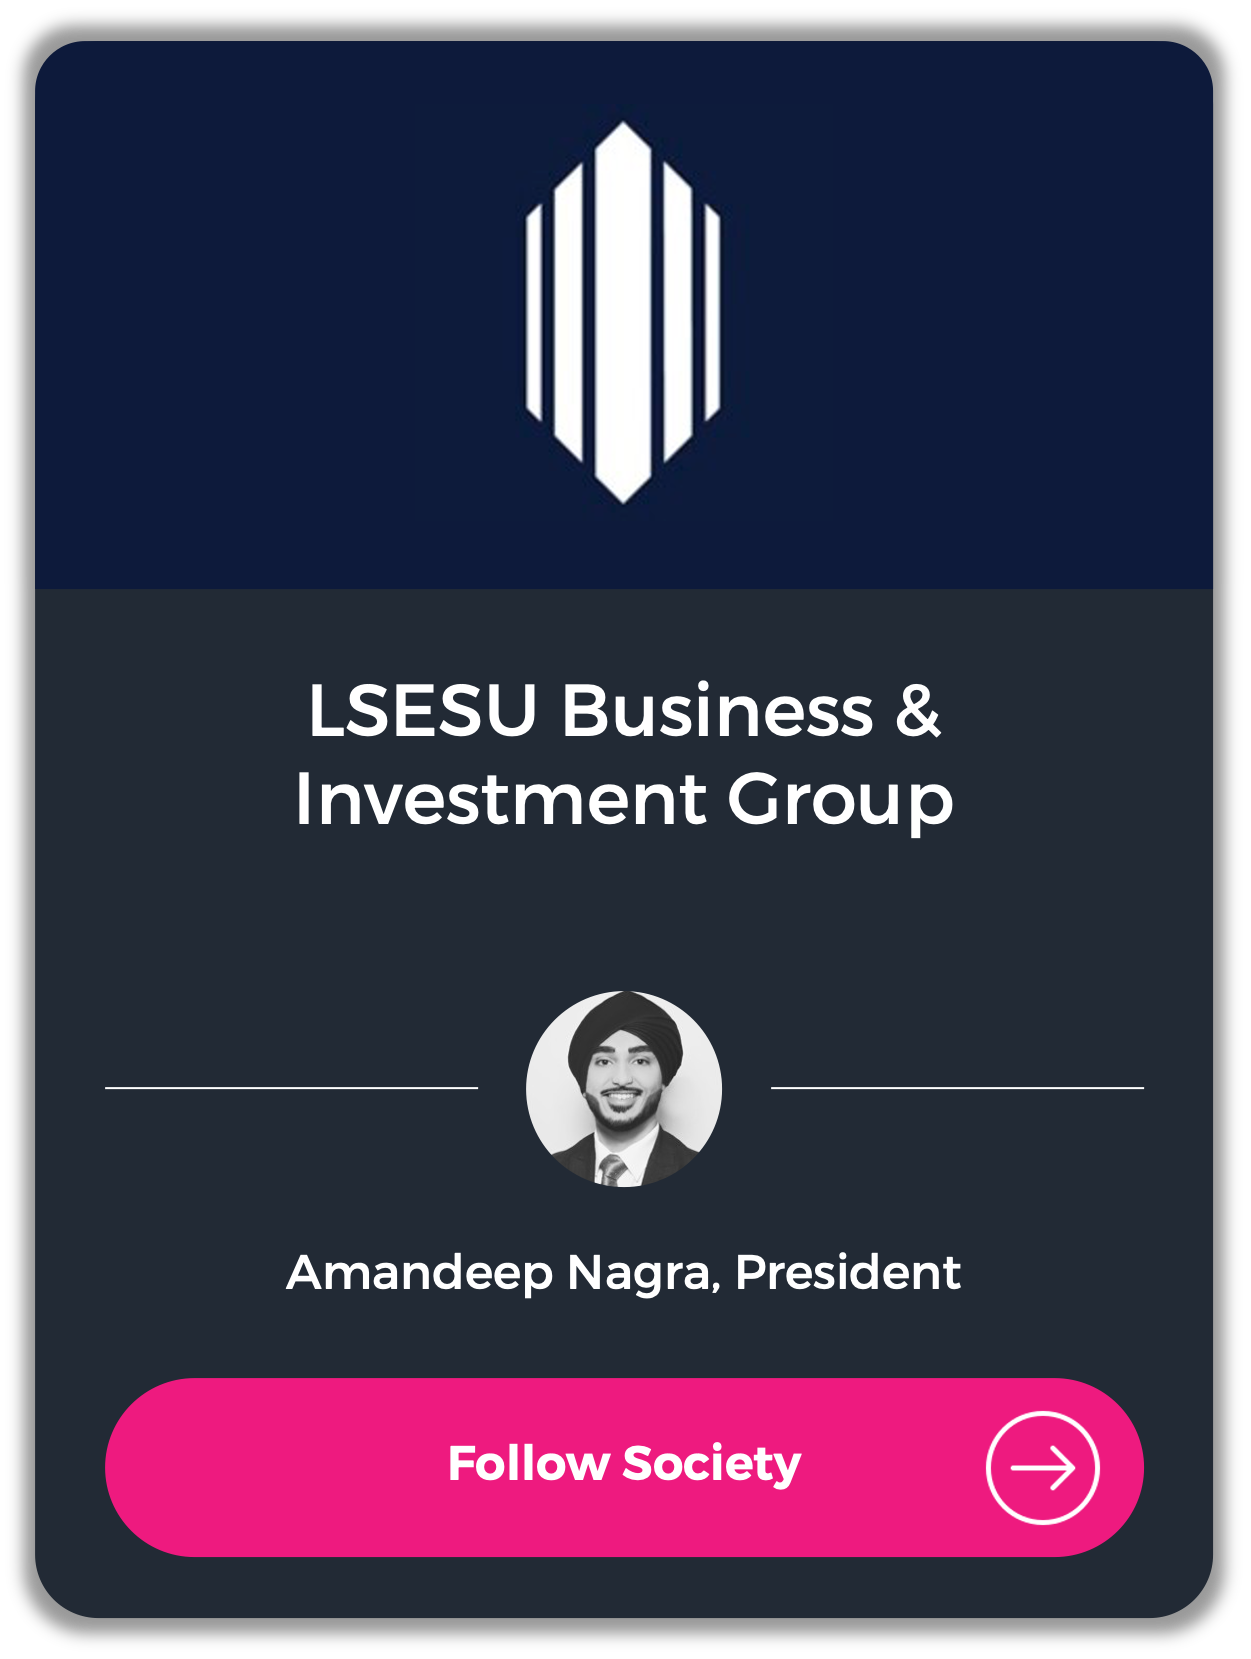 LSESU_Business_Investment_Group_Windo_Preside